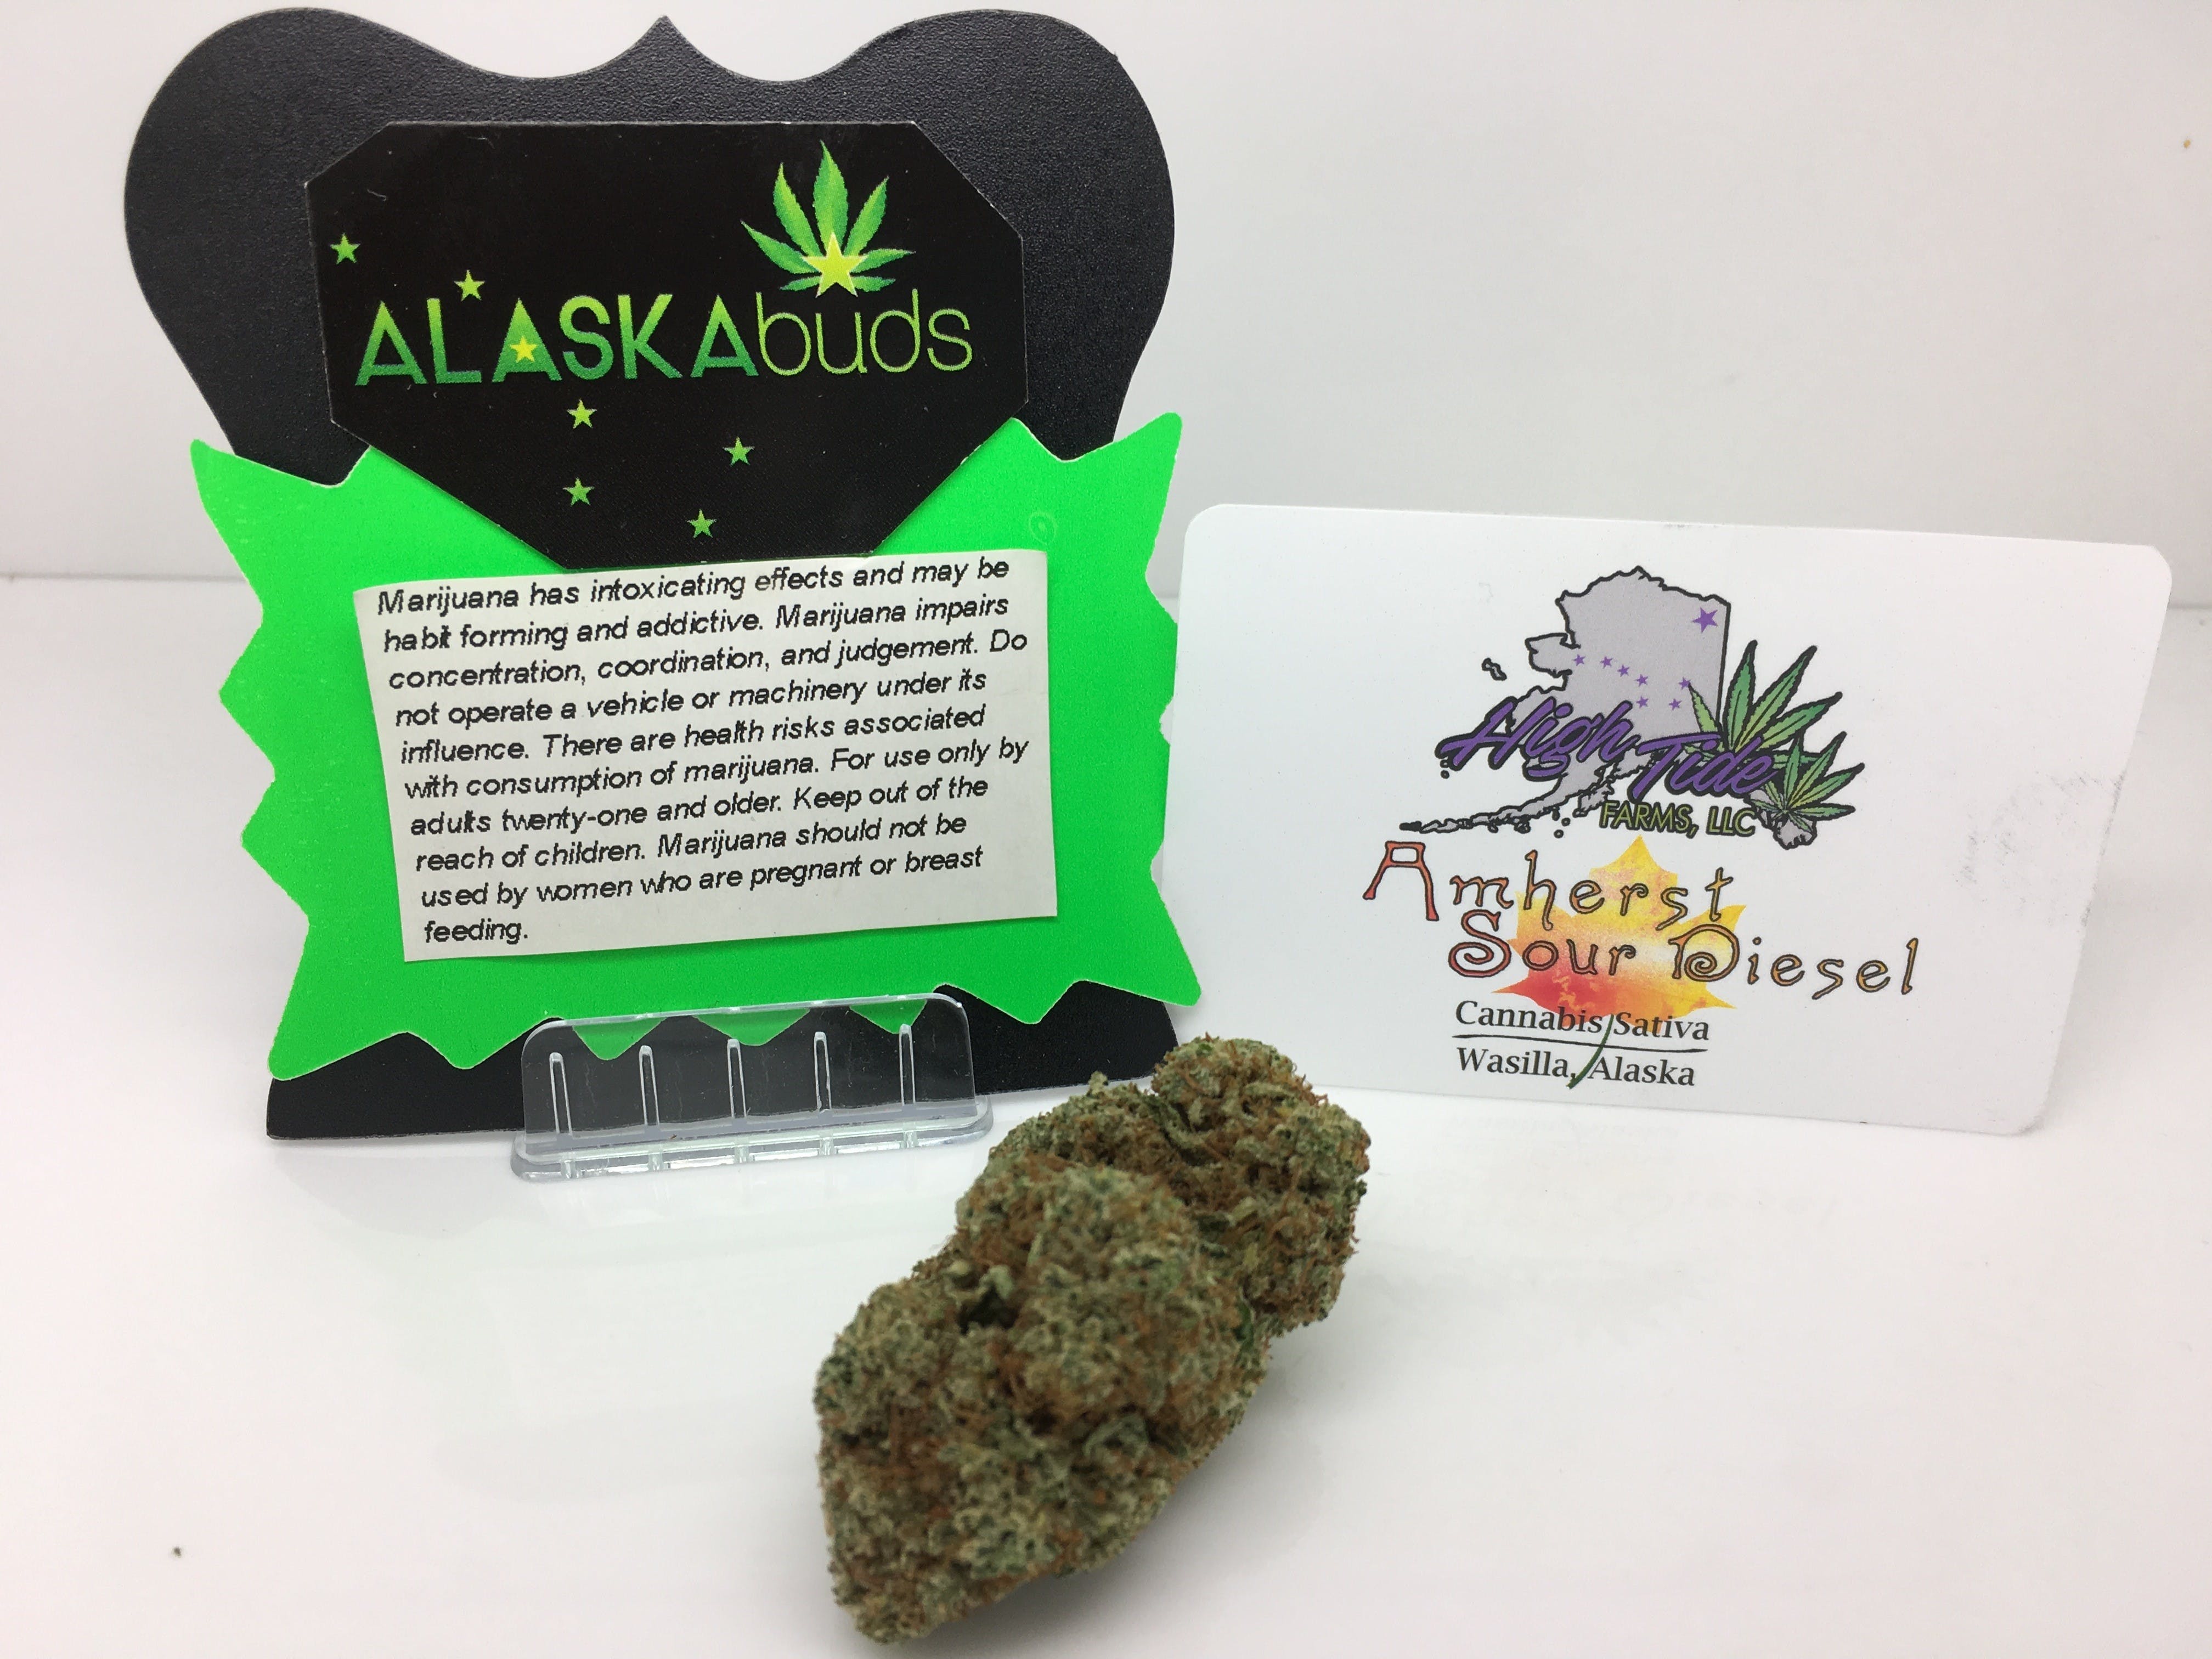 marijuana-dispensaries-1005-e-5th-ave-anchorage-amherst-sour-diesel-thc-26-50-25-from-high-tide-farms